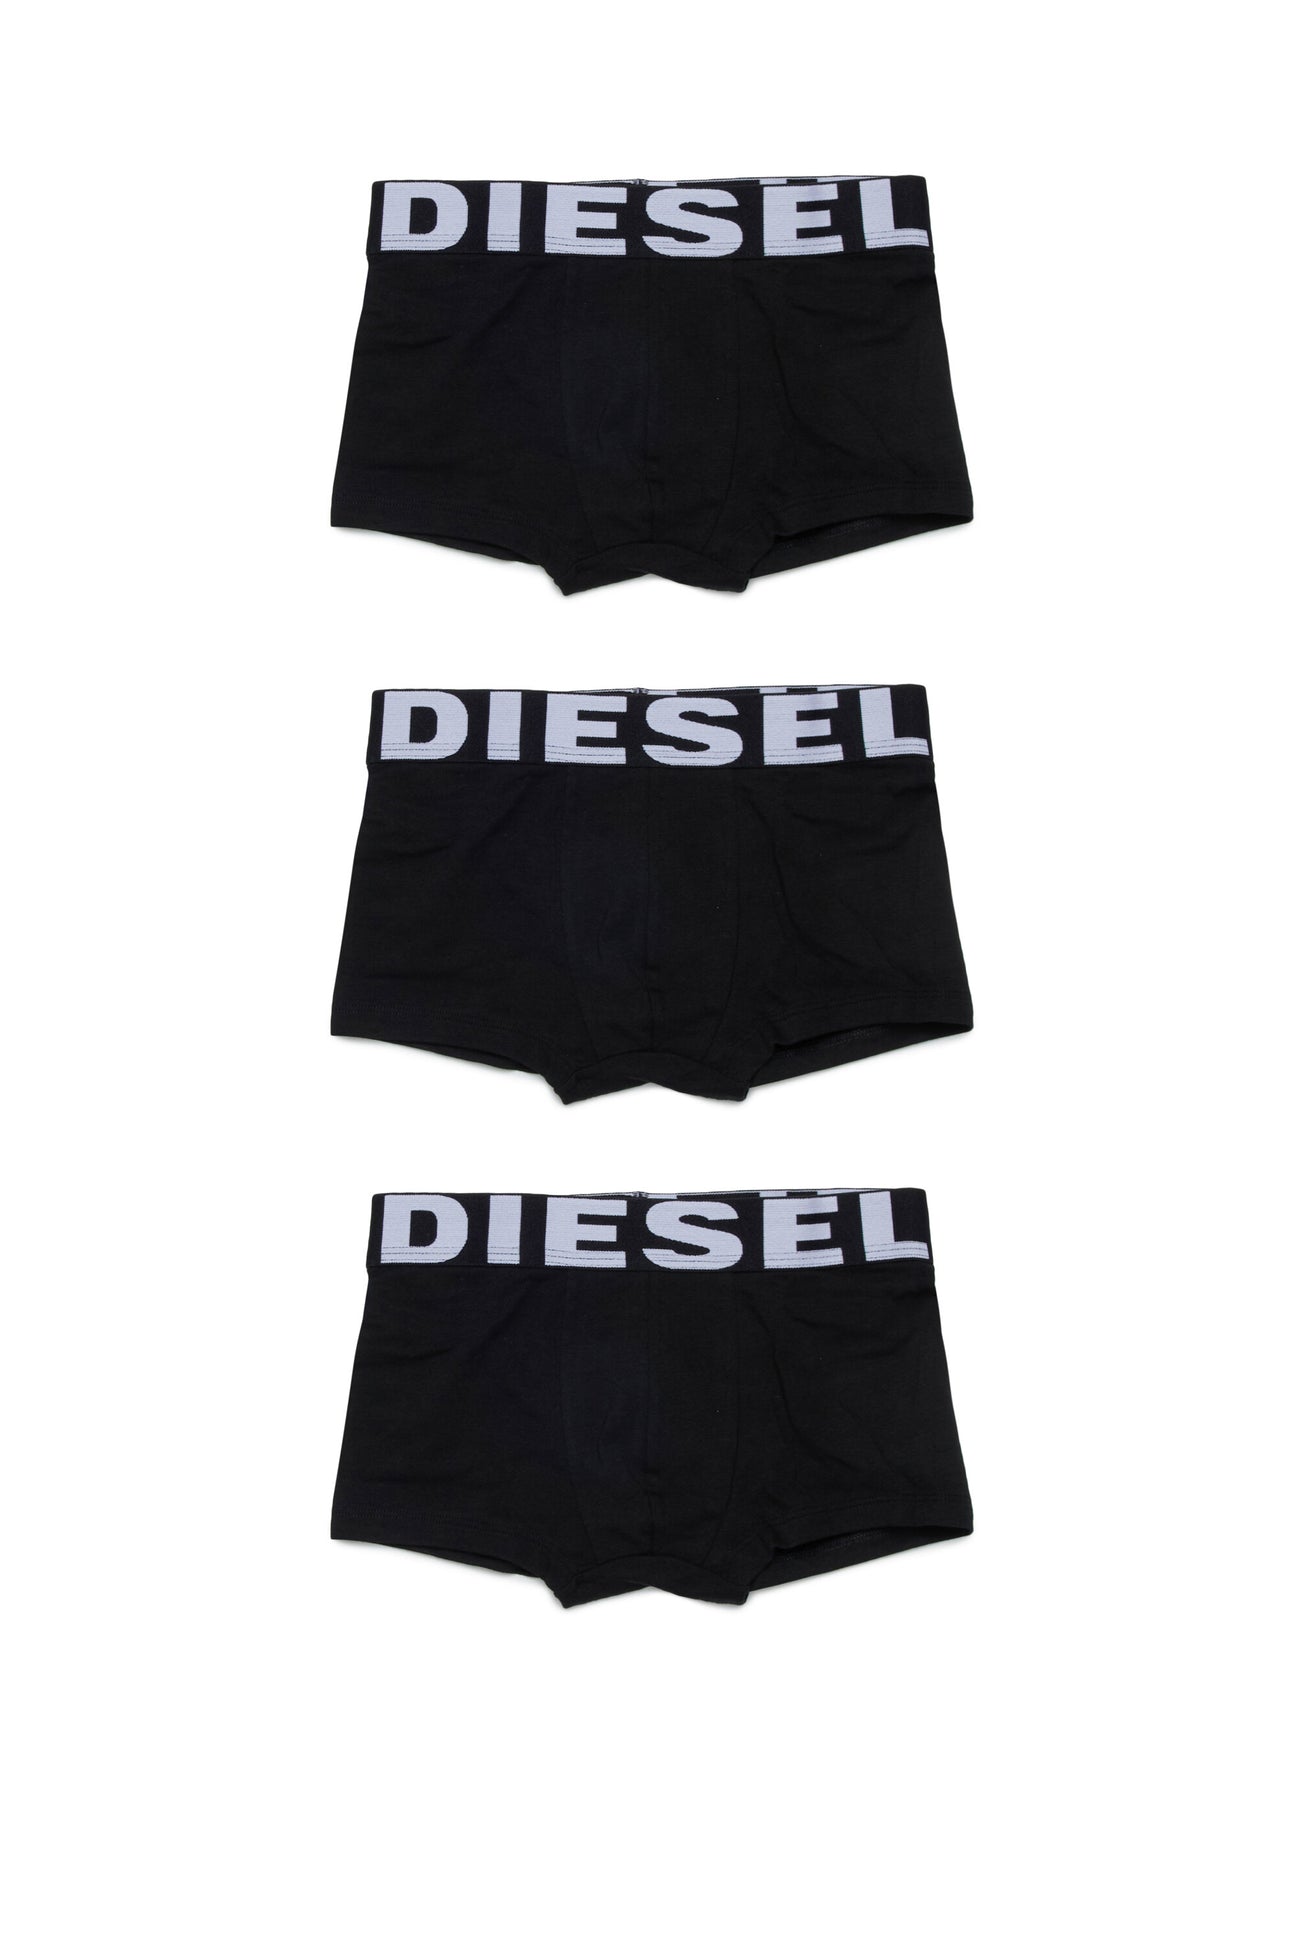 Branded jersey boxer shorts - 3 pairs 